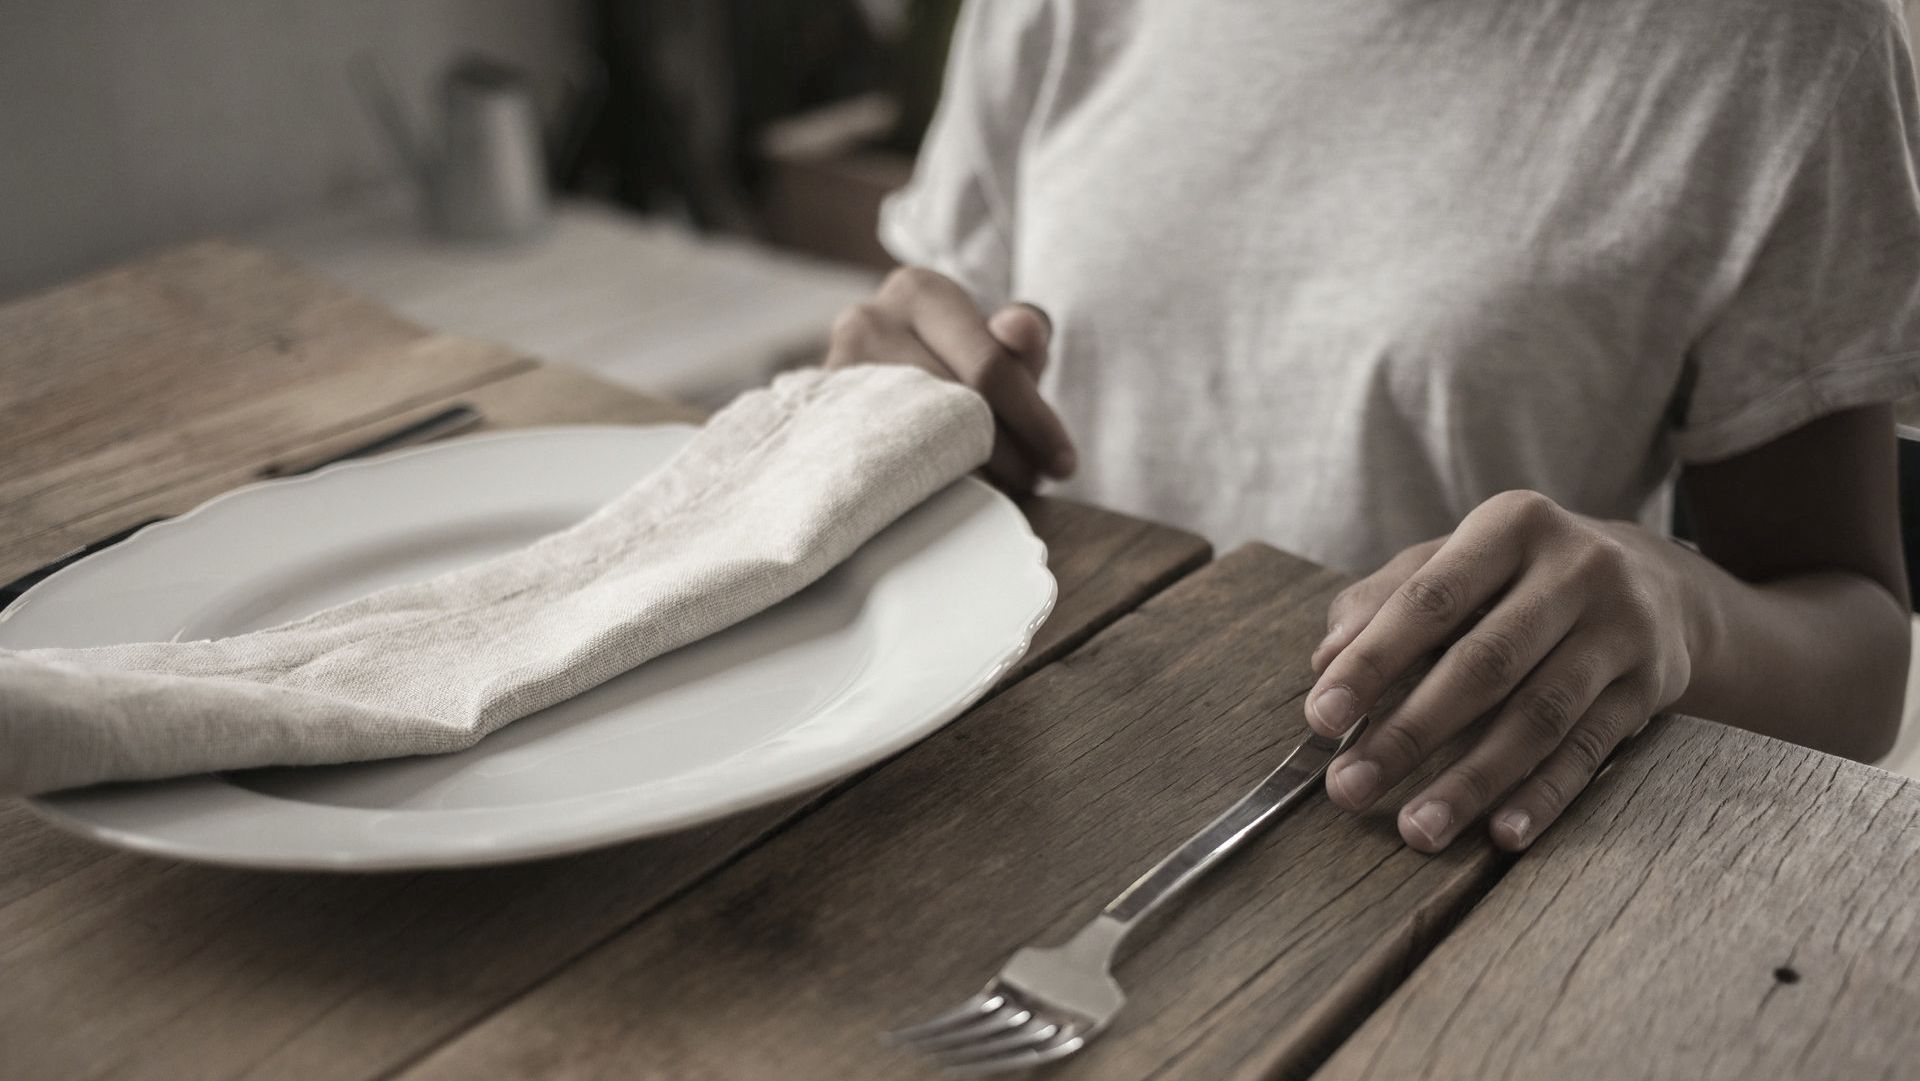 Learn more about eating disorders